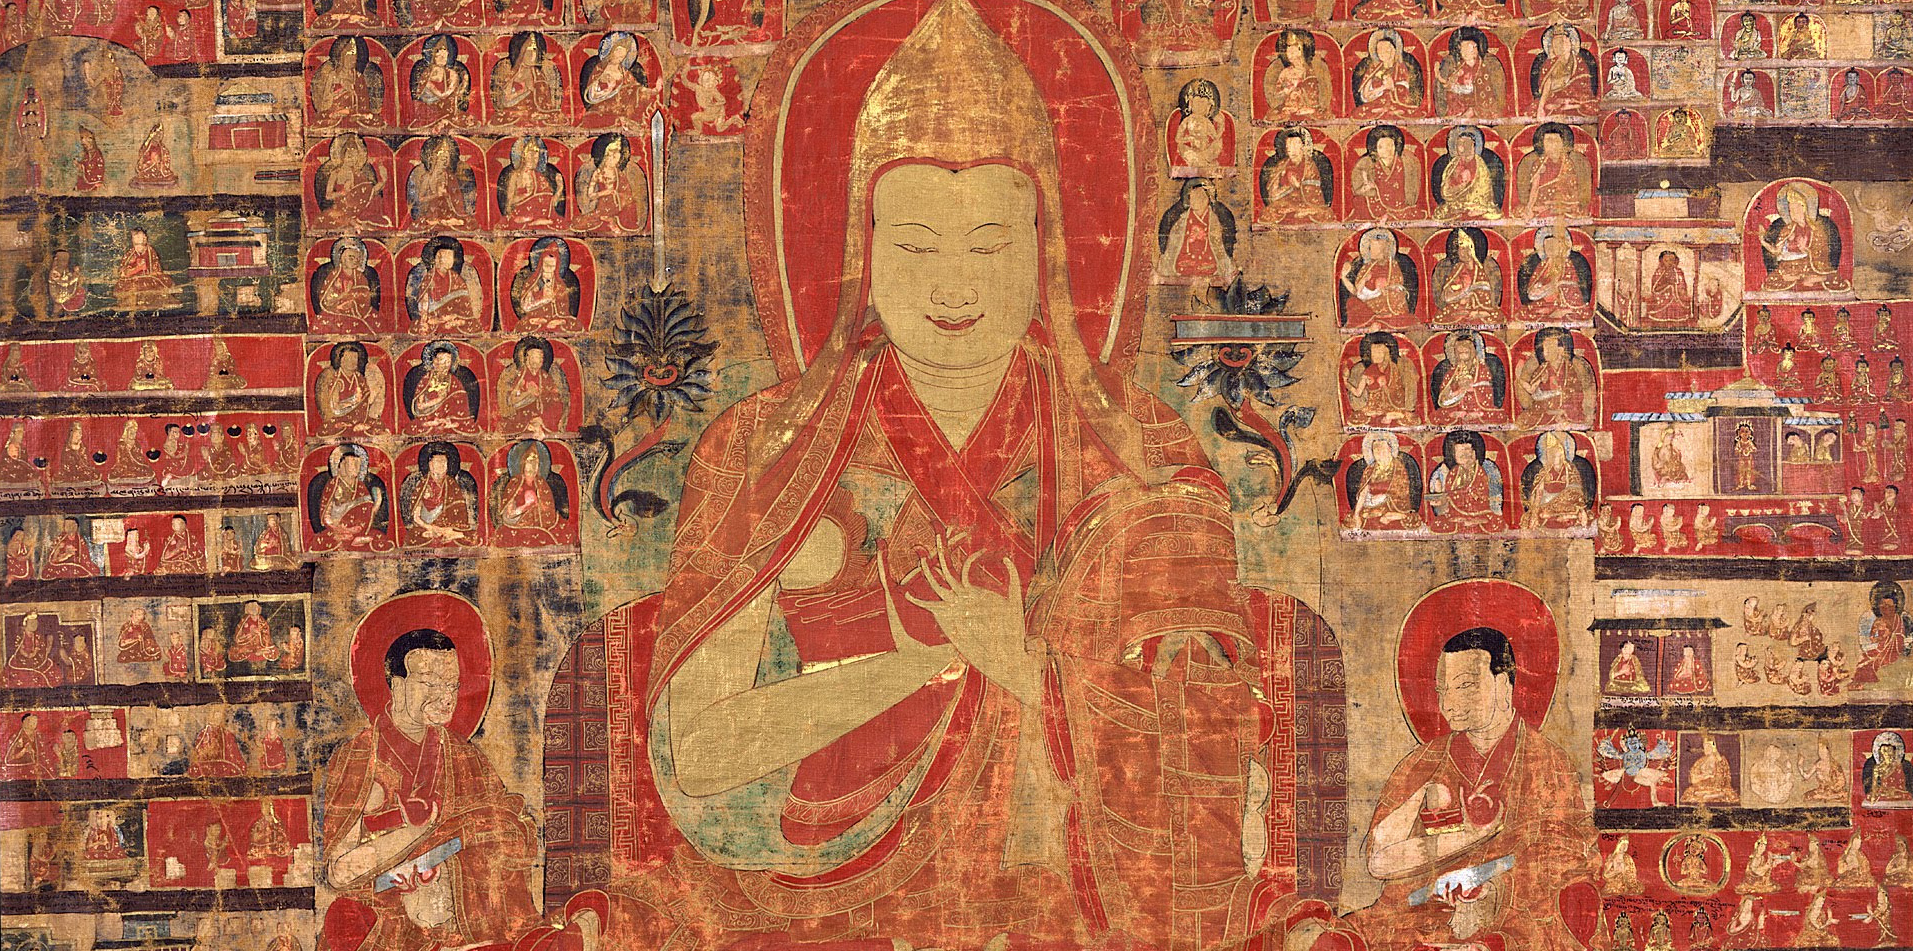 The Middle-Length Treatise on the Stages of the Path to Enlightenment